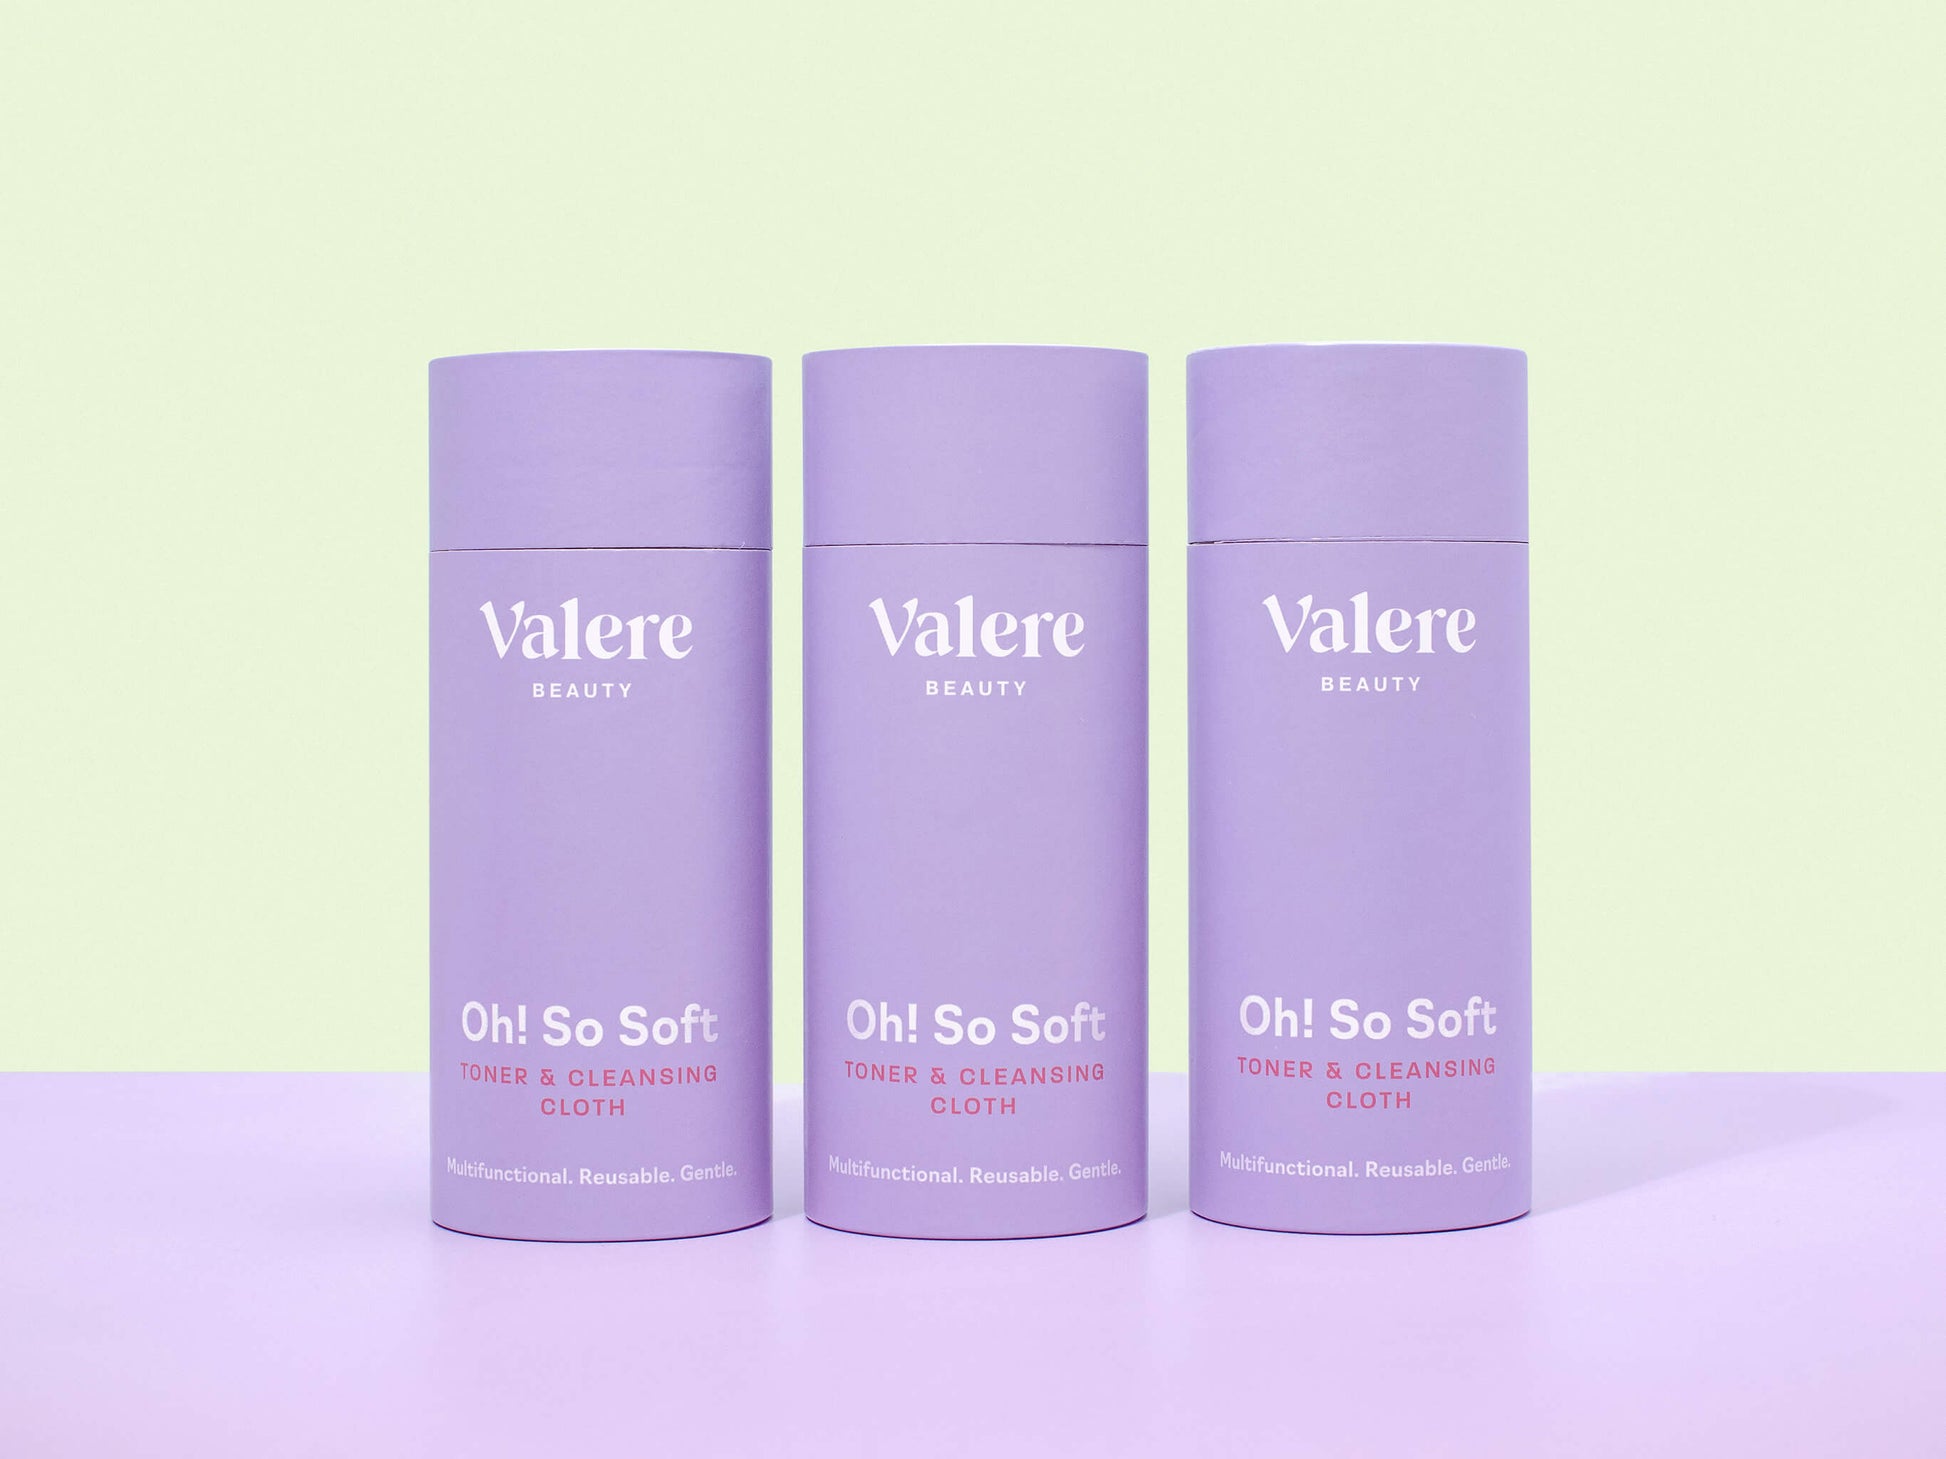 Valere Beauty Oh! So Soft Toner & Cleansing Cloth Microfiber Makeup Remover Cloth and Bamboo Cotton Toner Cloth Single Bundle cylinder packaging that says 'multifunctional, reusable, gentle'